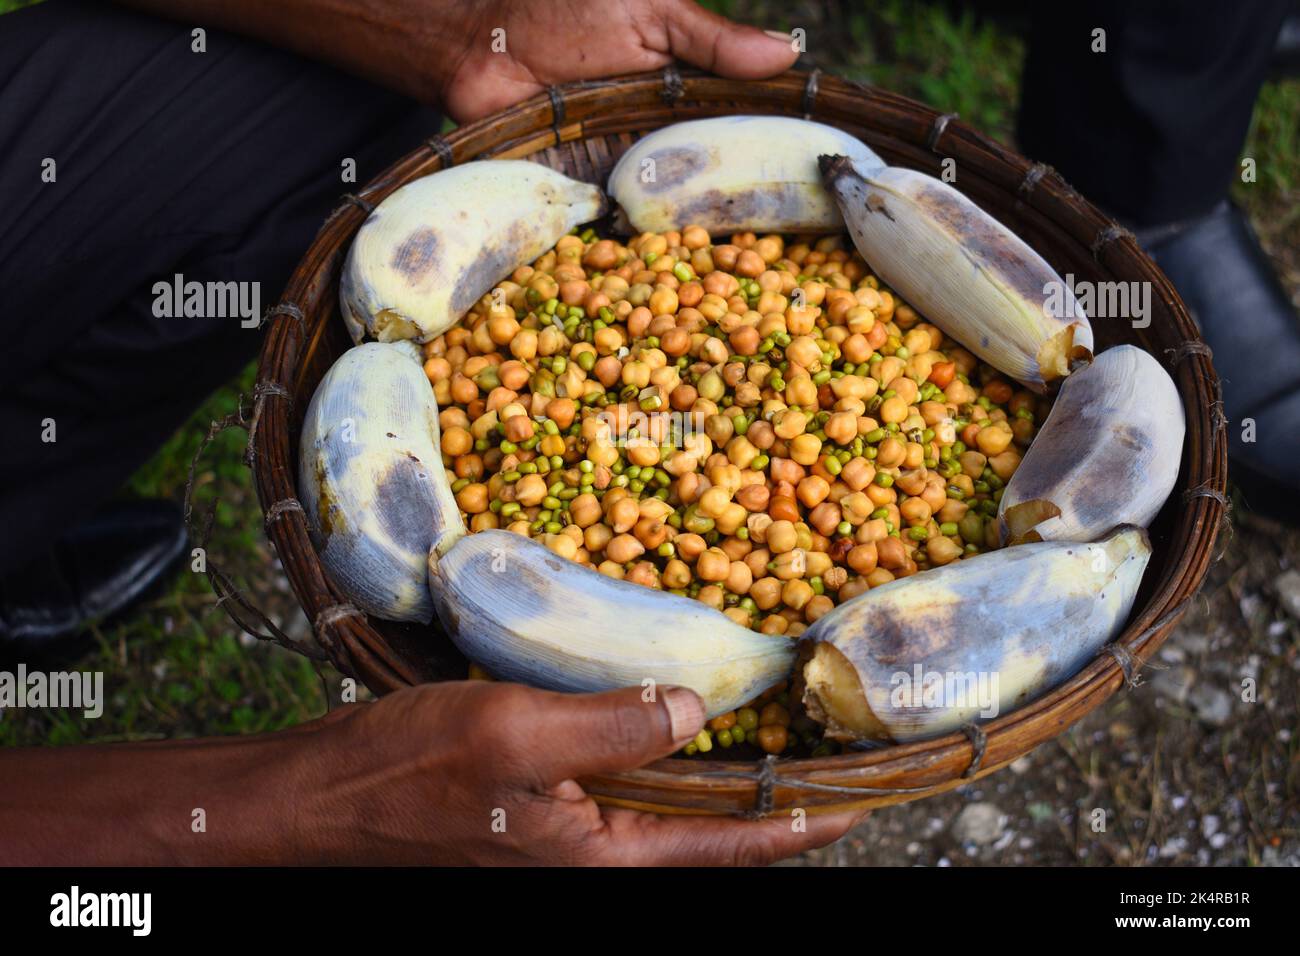 A person holding a basket  full of White chickpea (kabuli chana) and banana Stock Photo